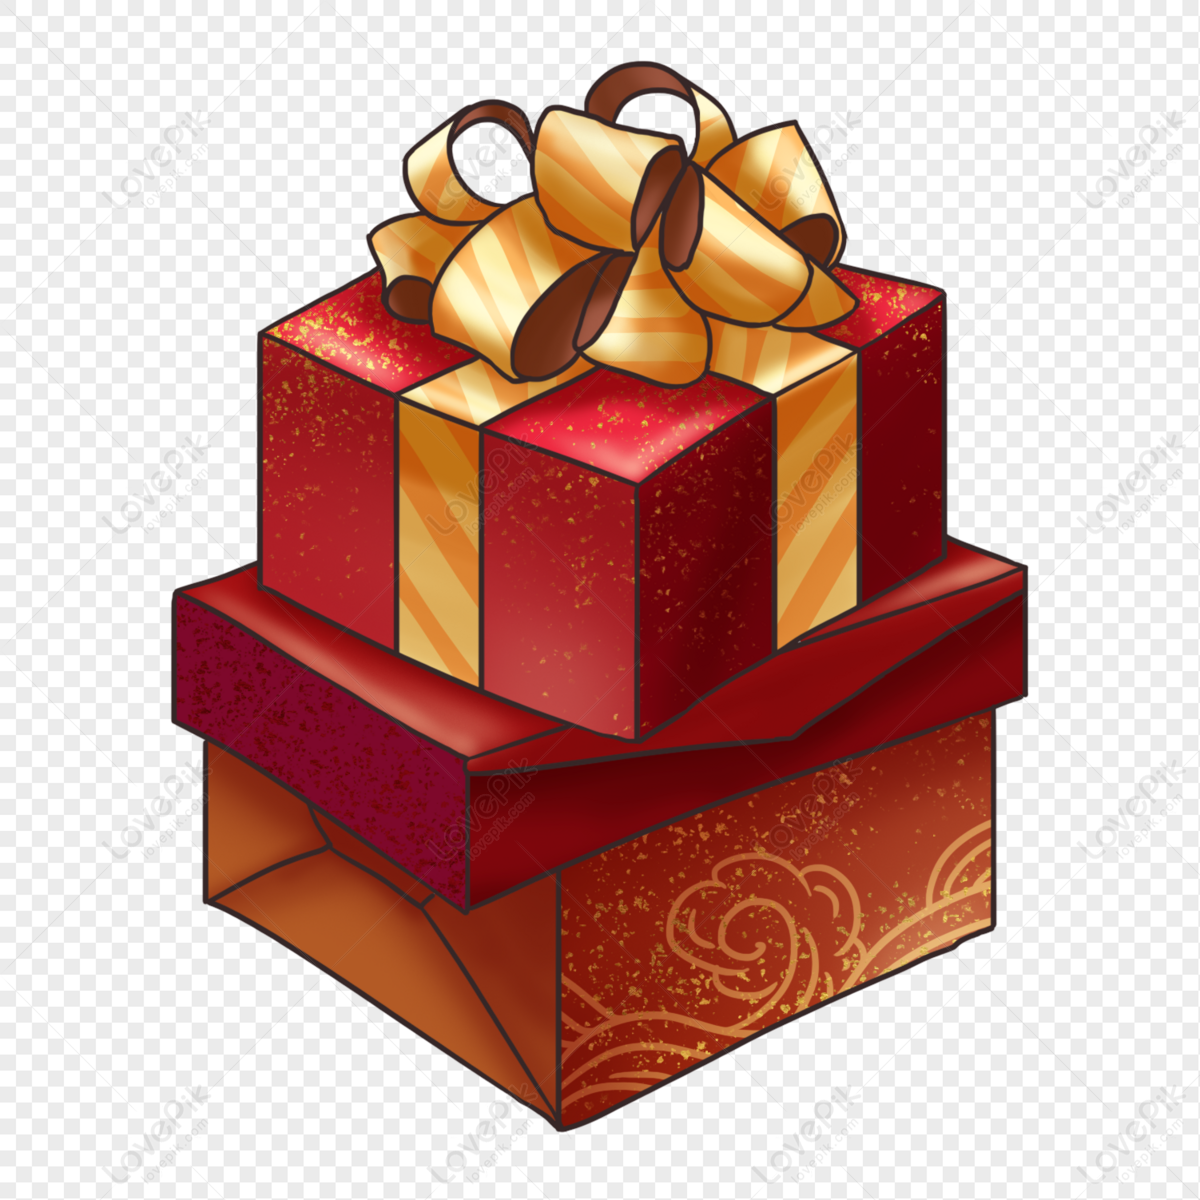 Gift Wrapping PNG Picture And Clipart Image For Free Download - Lovepik |  401673195